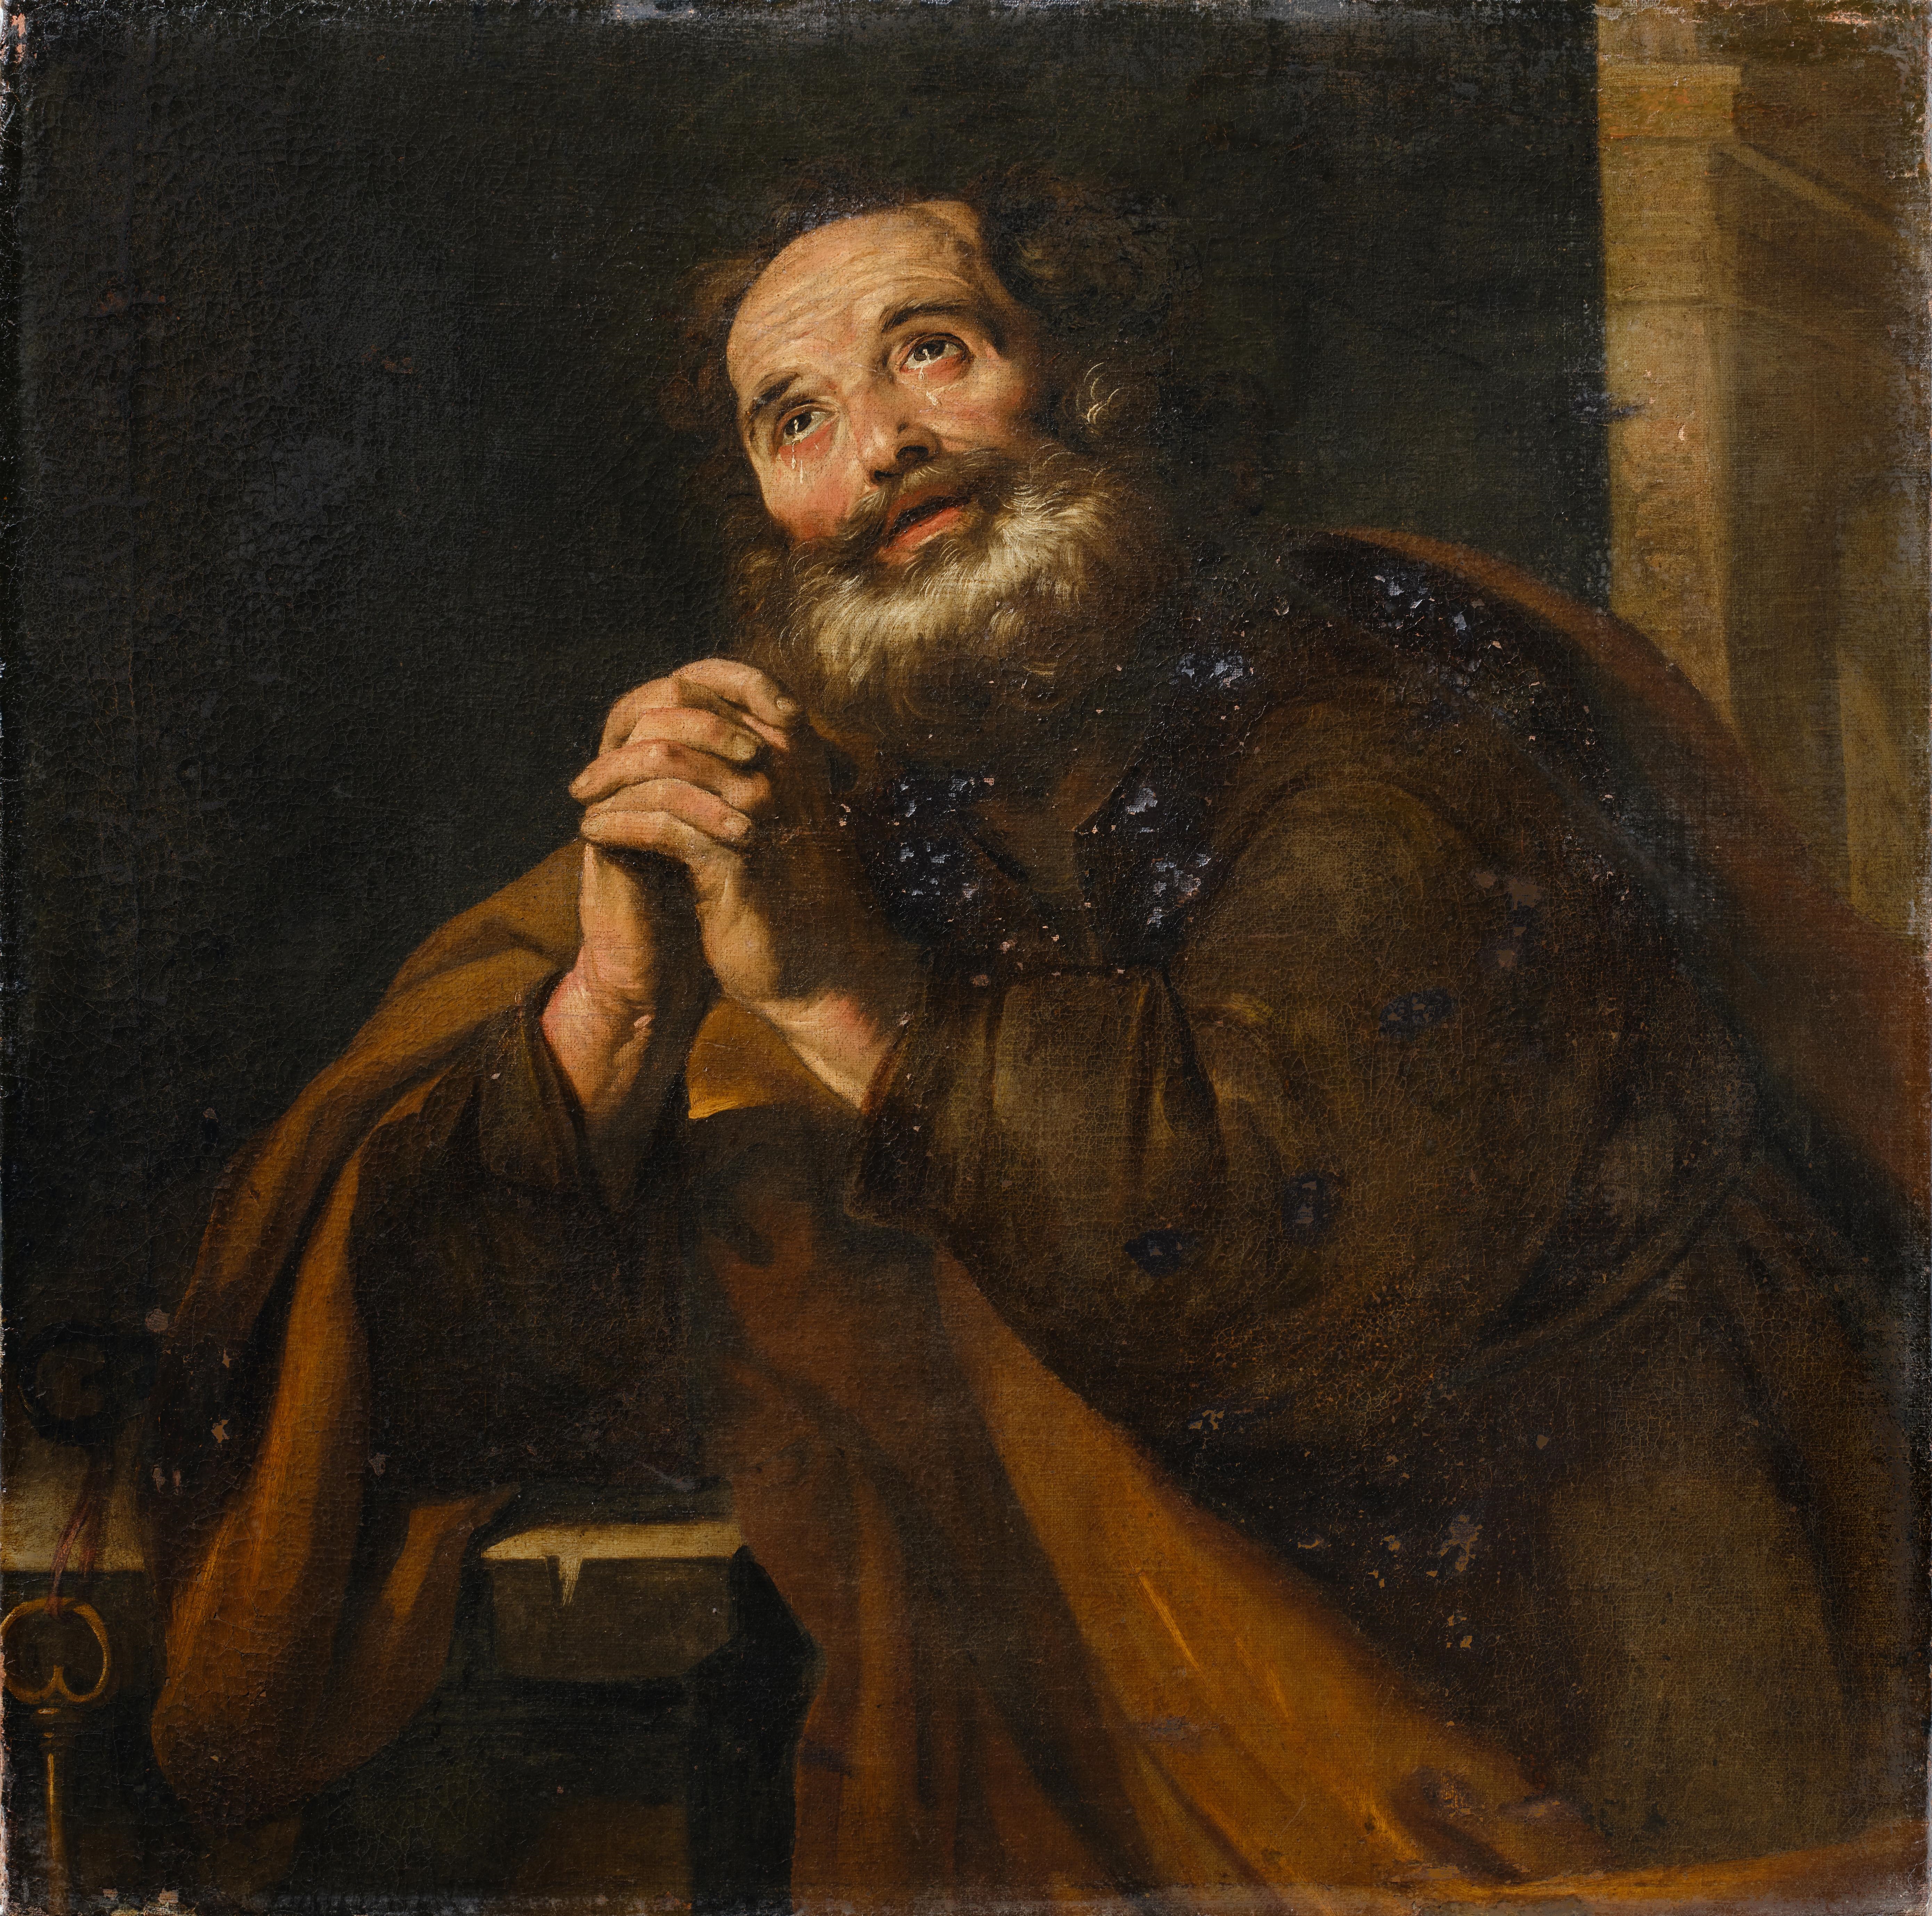 The tears of Saint Peter by Cesare Fracanzano, 1605–1651